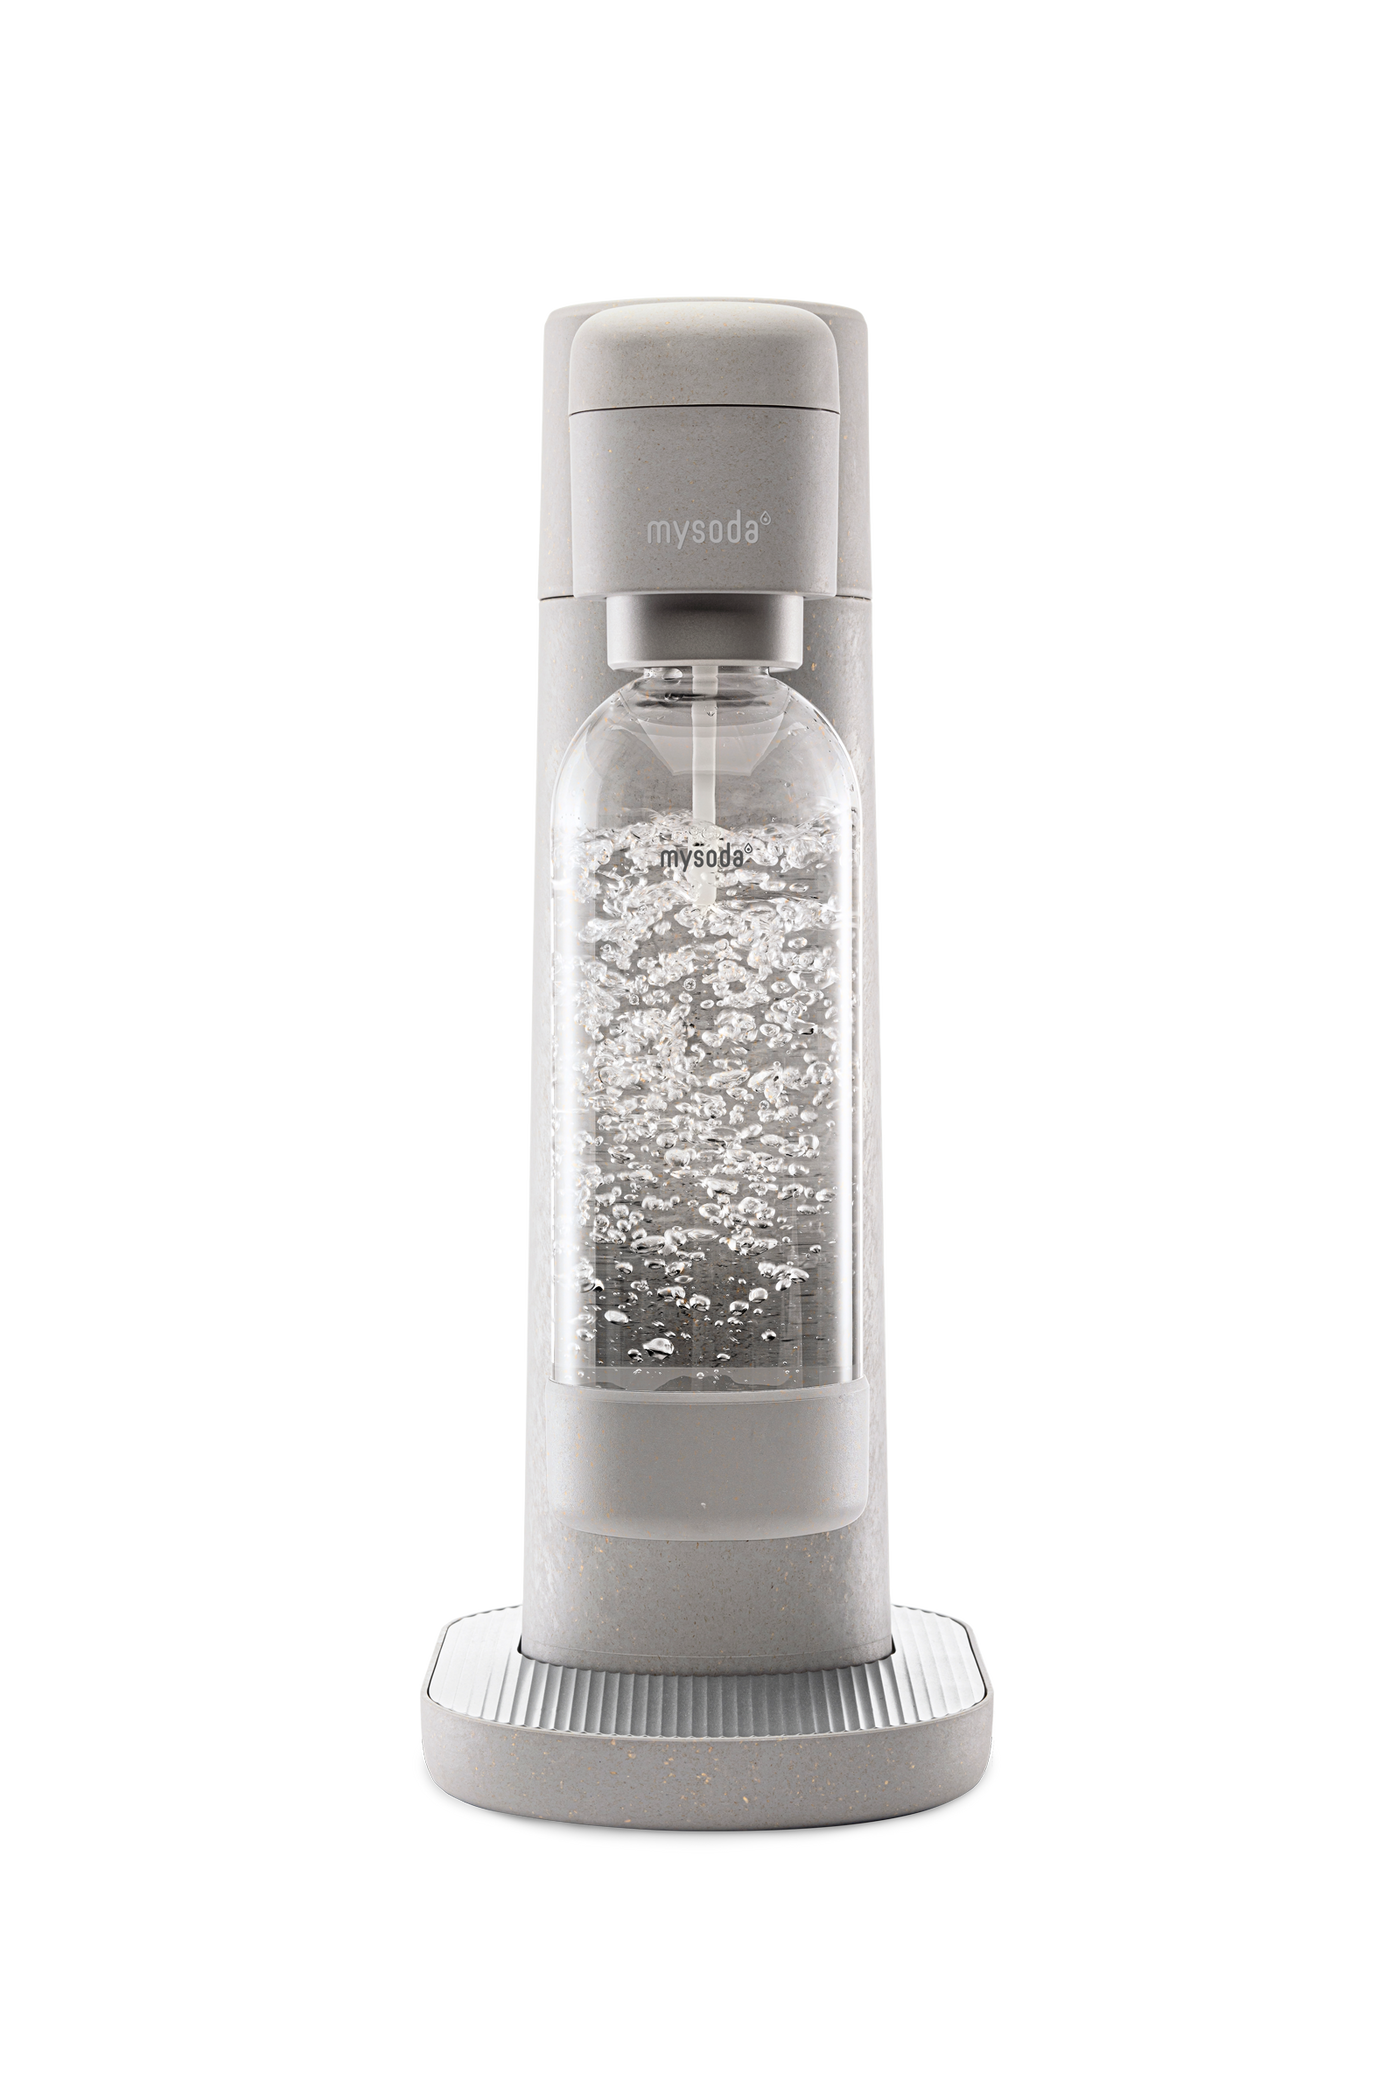 Dove Mysoda Toby sparkling water maker viewed from the front